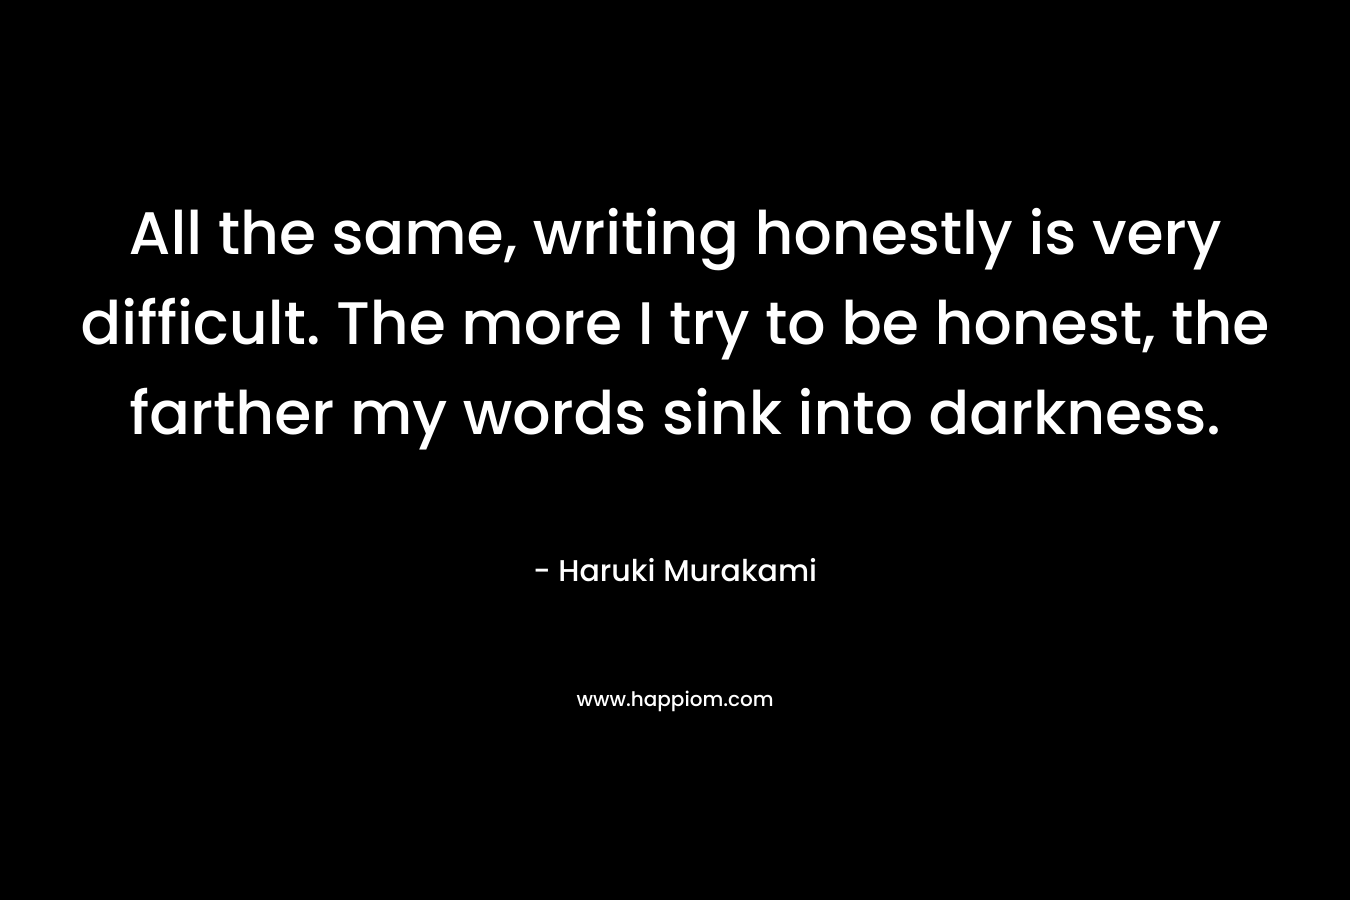 All the same, writing honestly is very difficult. The more I try to be honest, the farther my words sink into darkness.